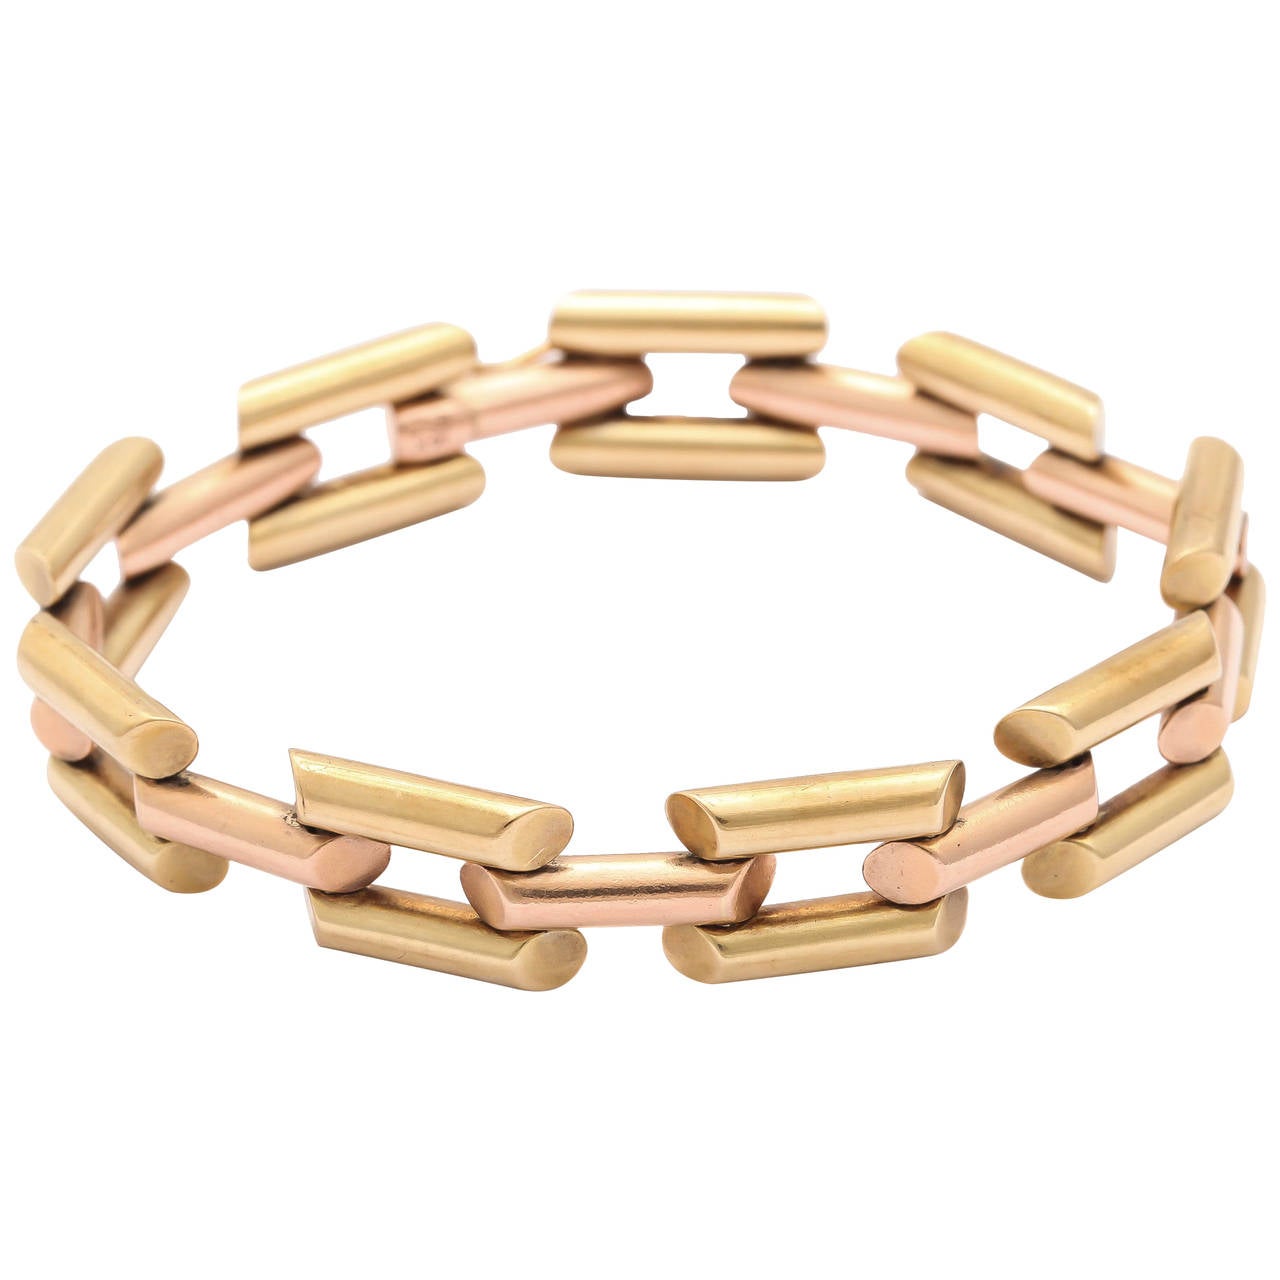 Designed as a line of parallel double bar links of yellow gold connected by single rose gold bar links of similar design, one end fitted with a slide clasp and safety device. The tubular links are bevelled at the ends, adding to the angular retro